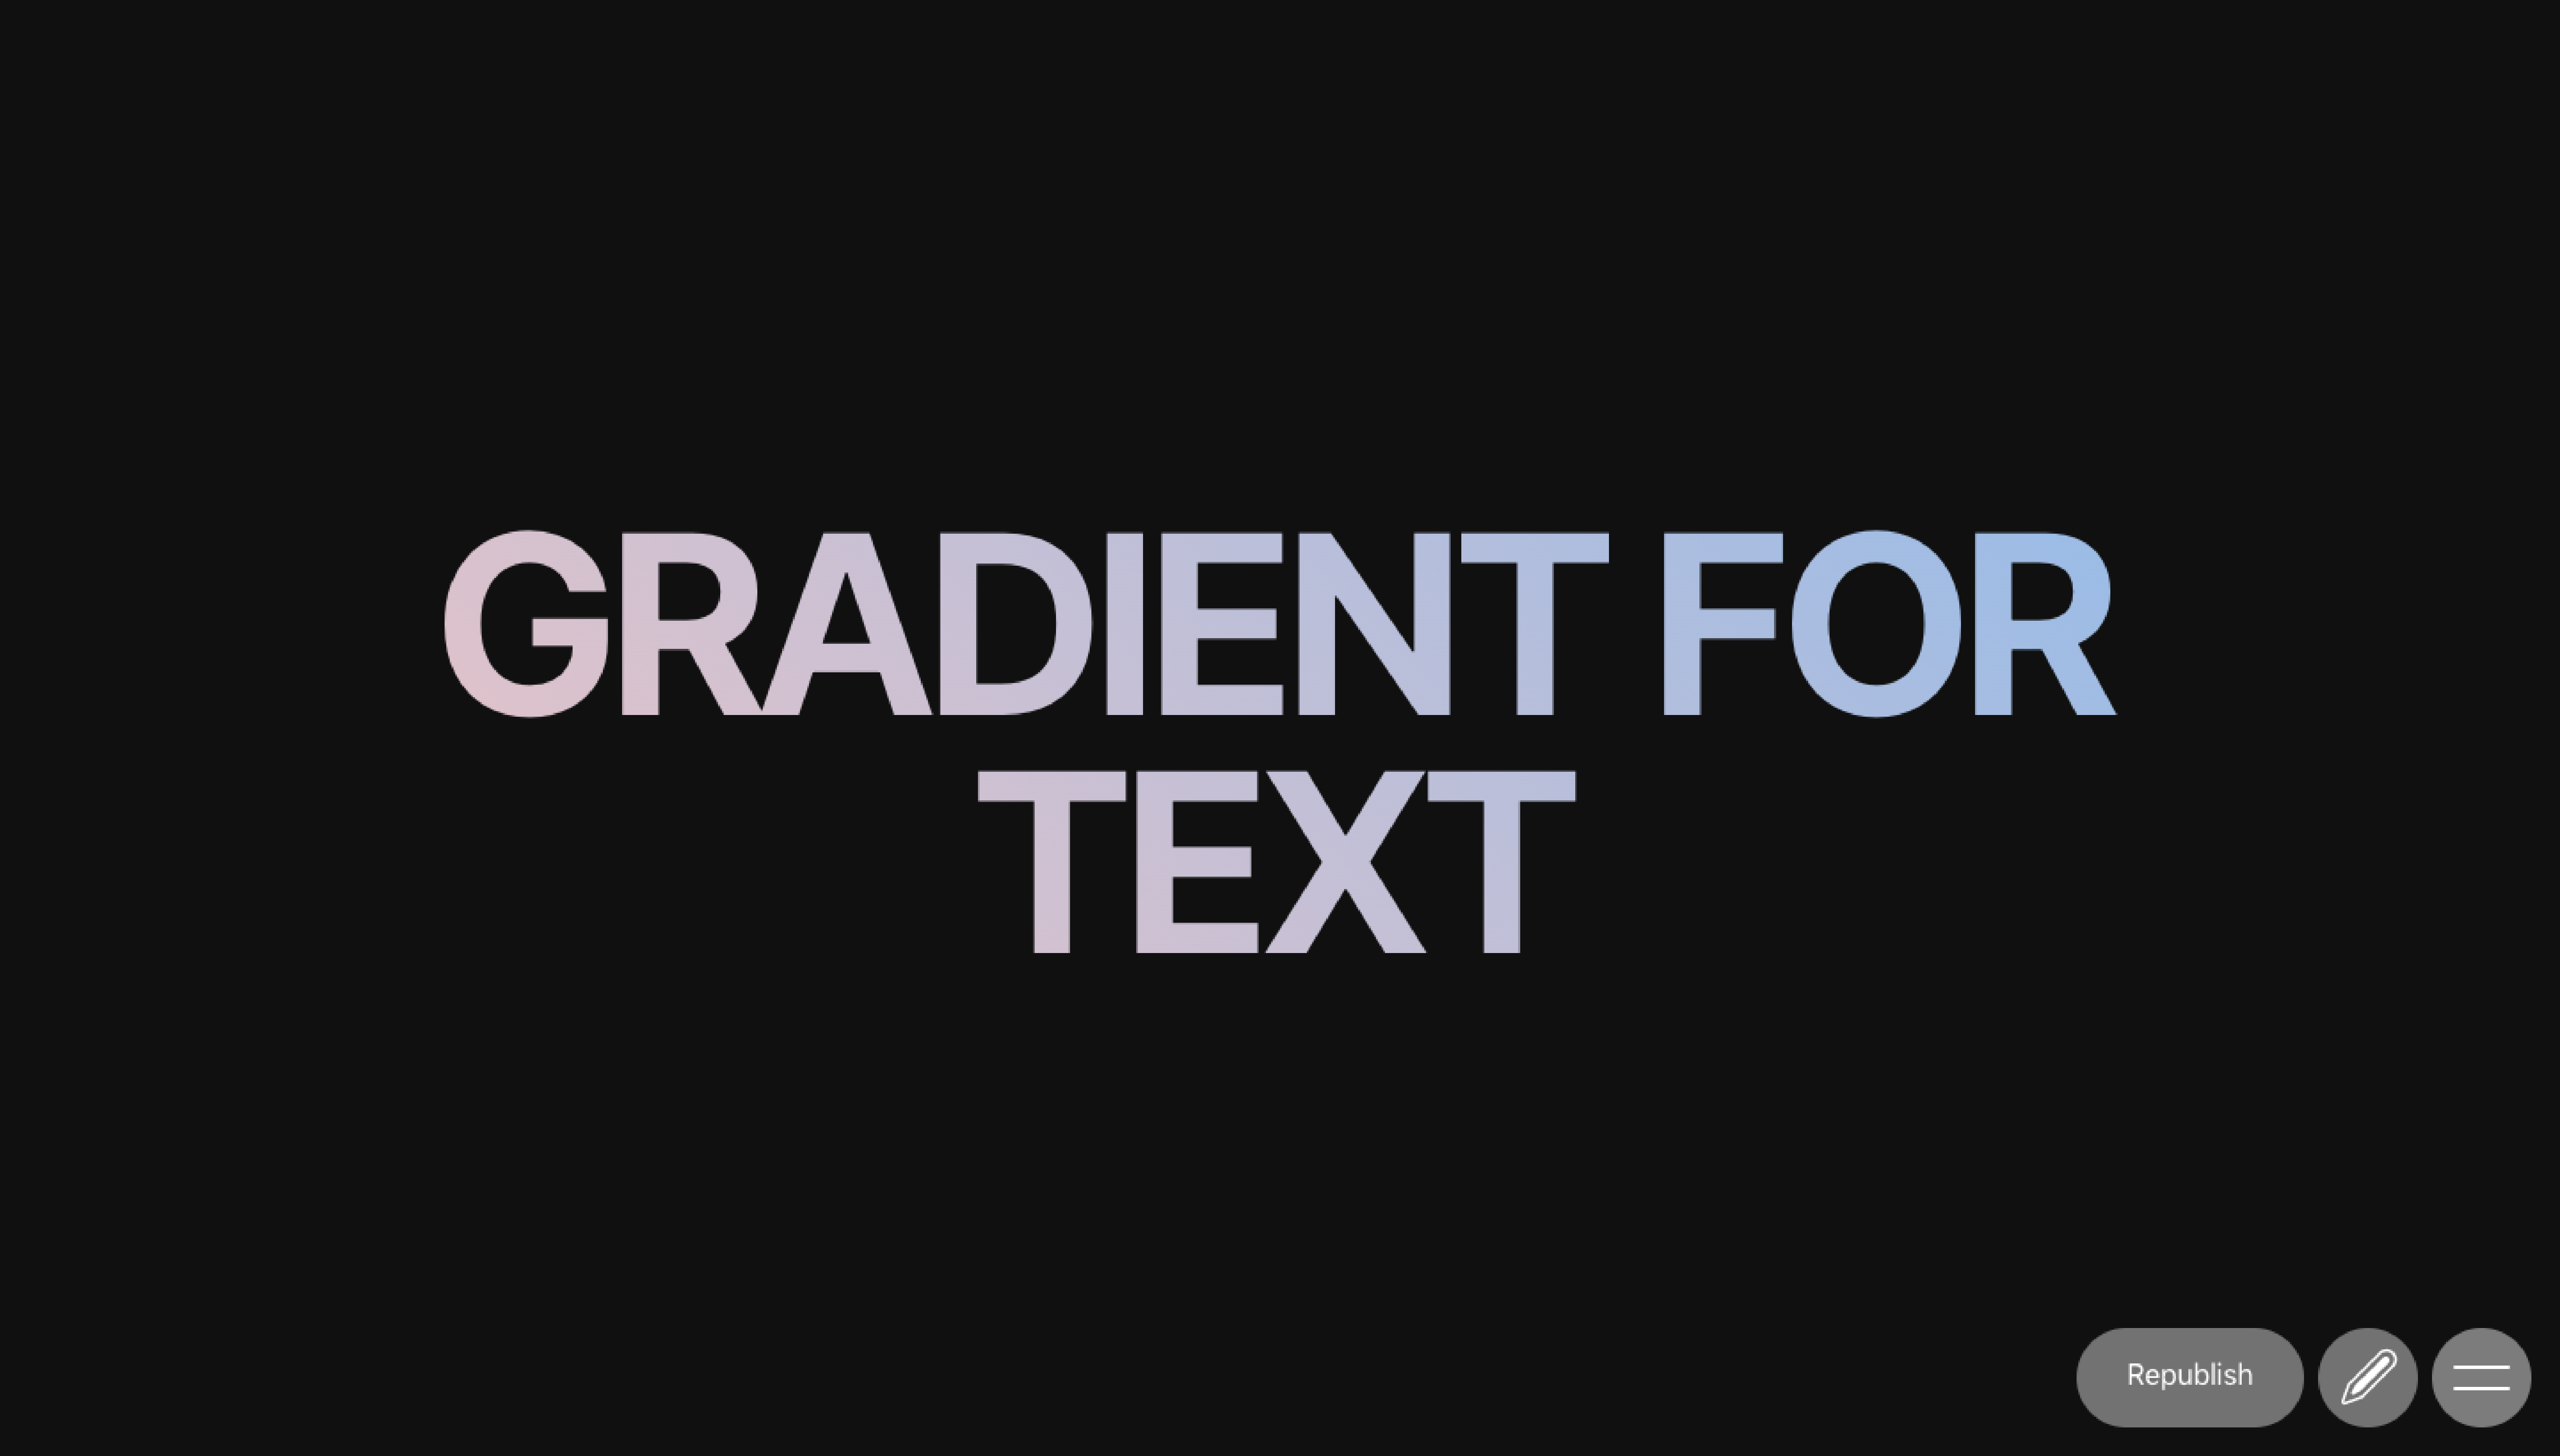 Gradient_for_text.jpg